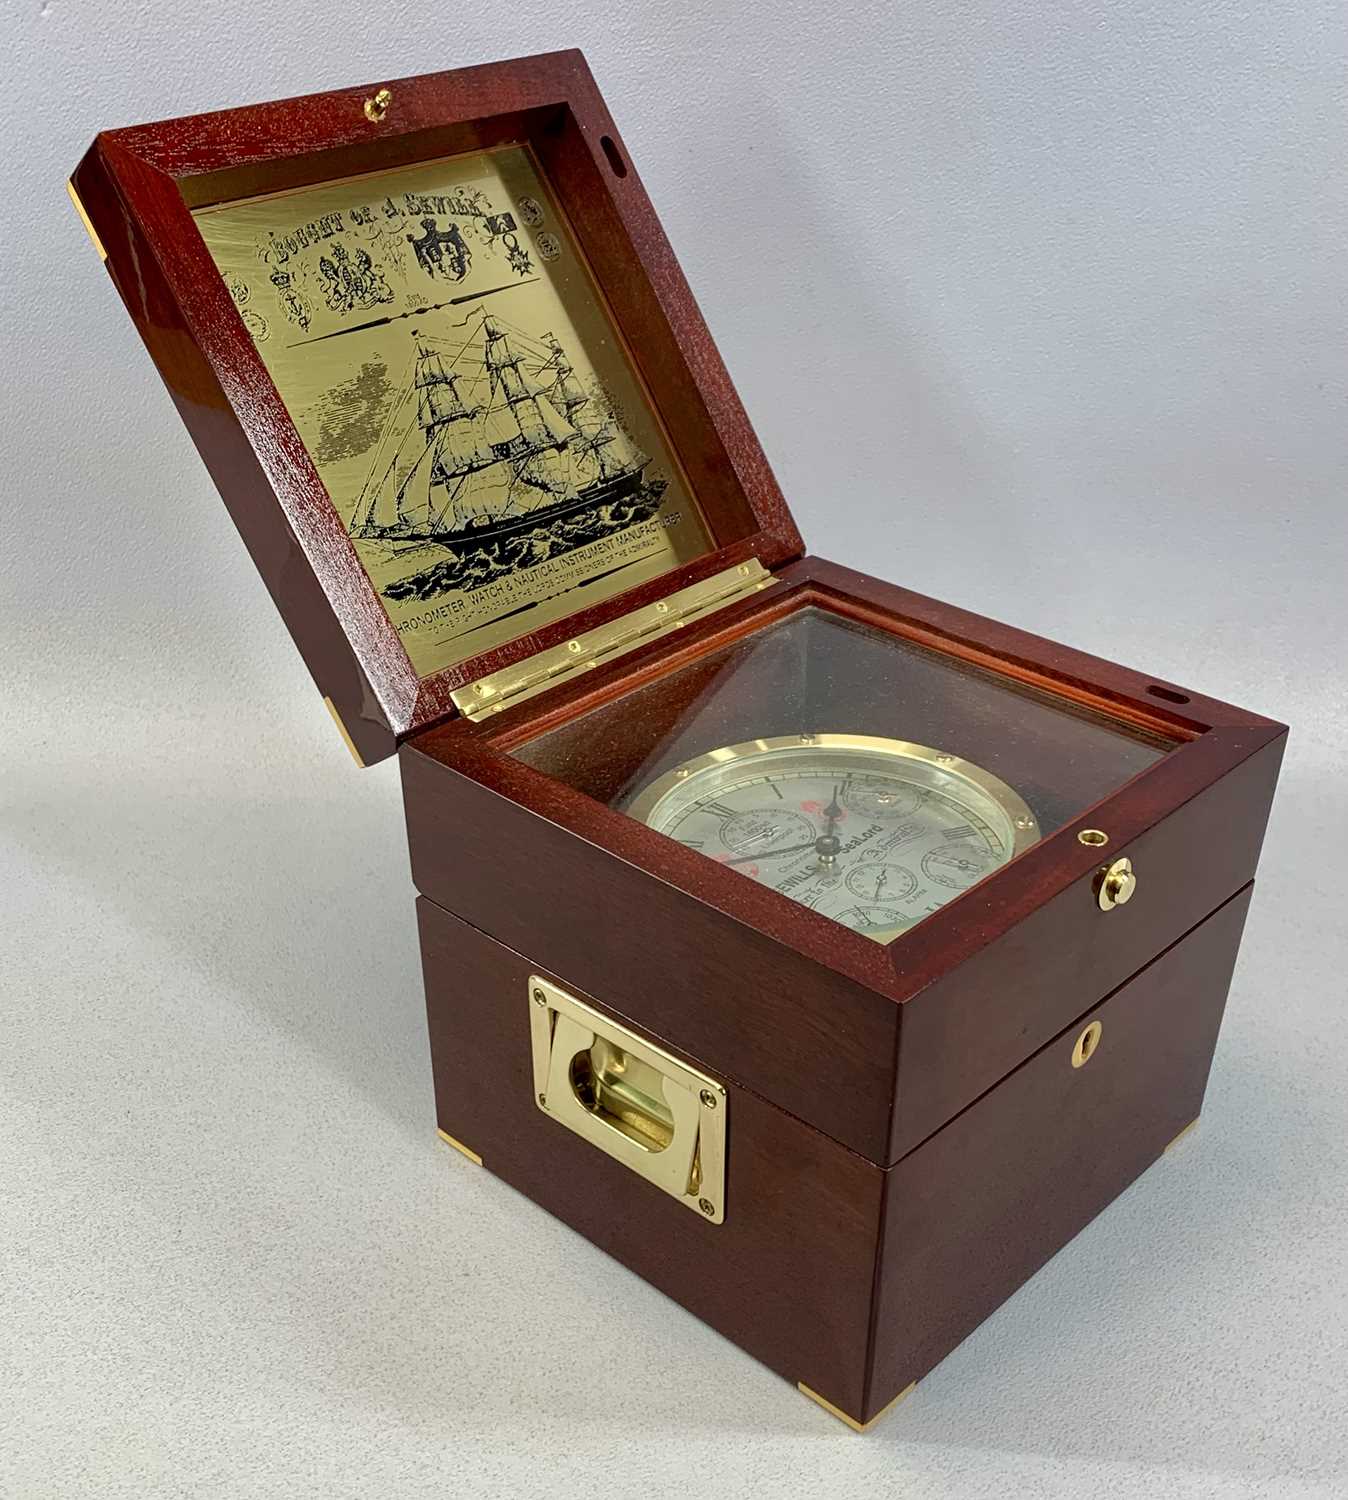 SEVILLS SEALORD FLAGSHIP SHIPS BELL CLOCK, with barometer, thermometer, hygrometer and tide guide, - Image 3 of 5